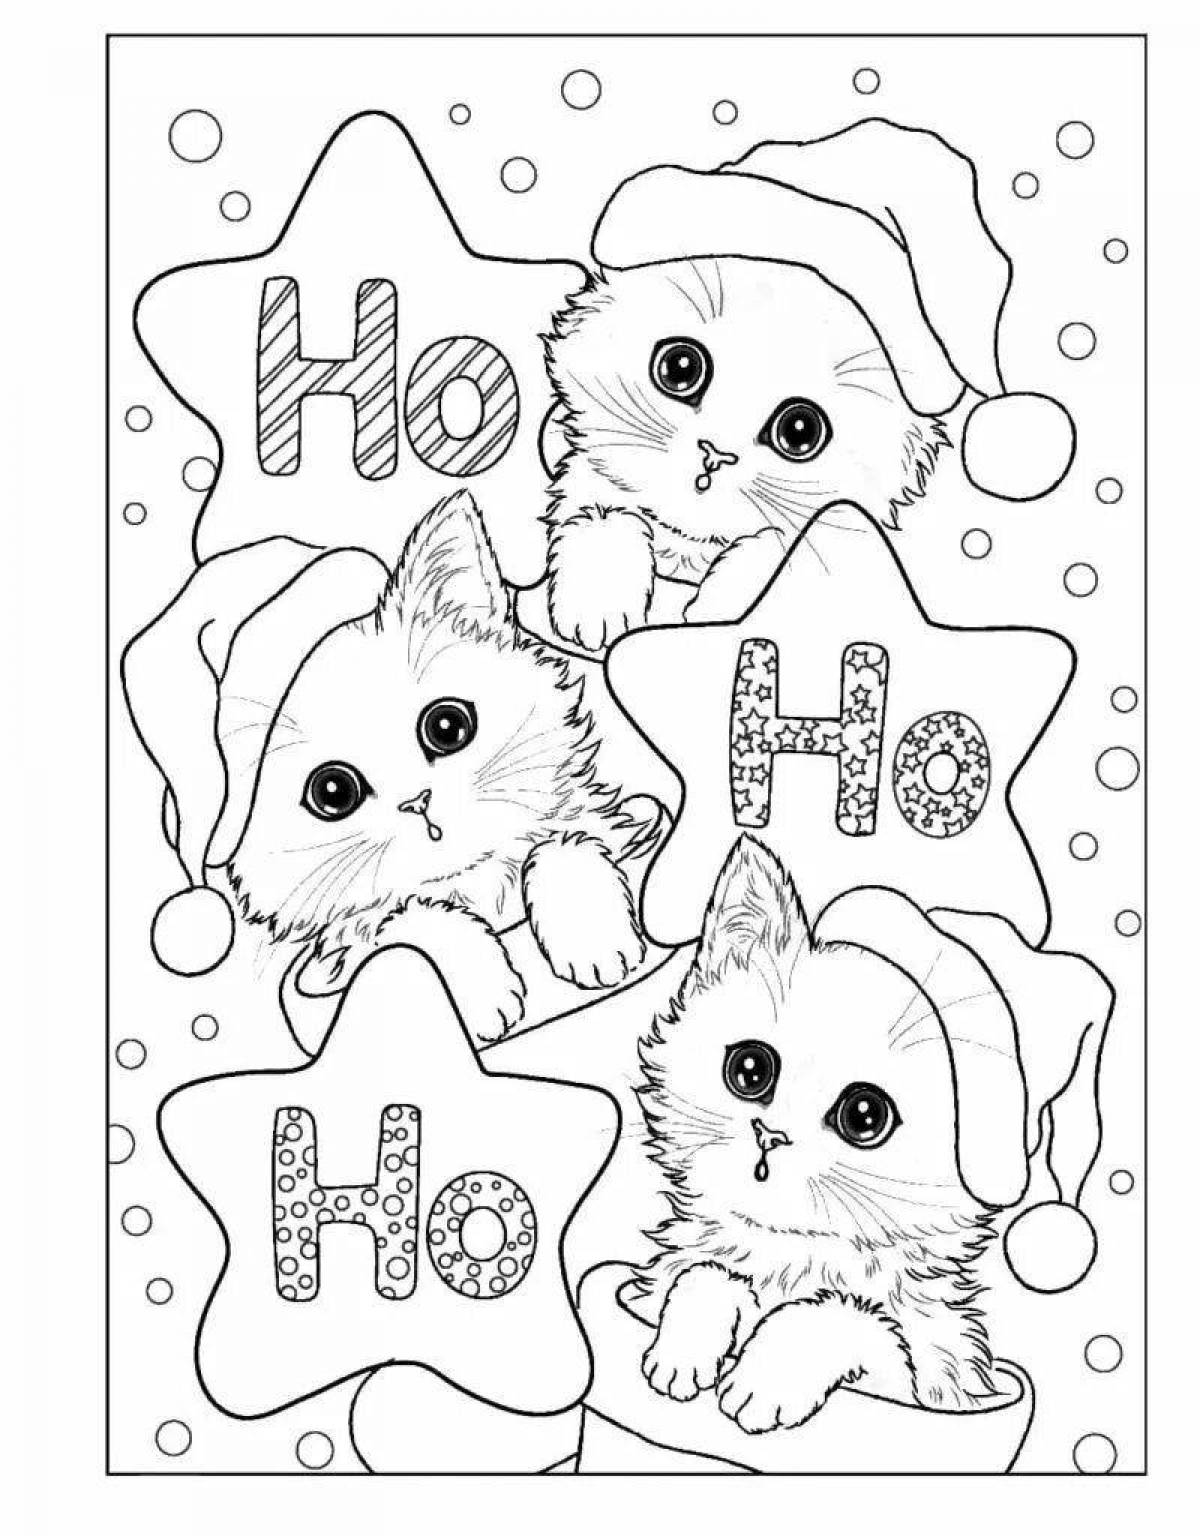 Colorful Christmas cat coloring book